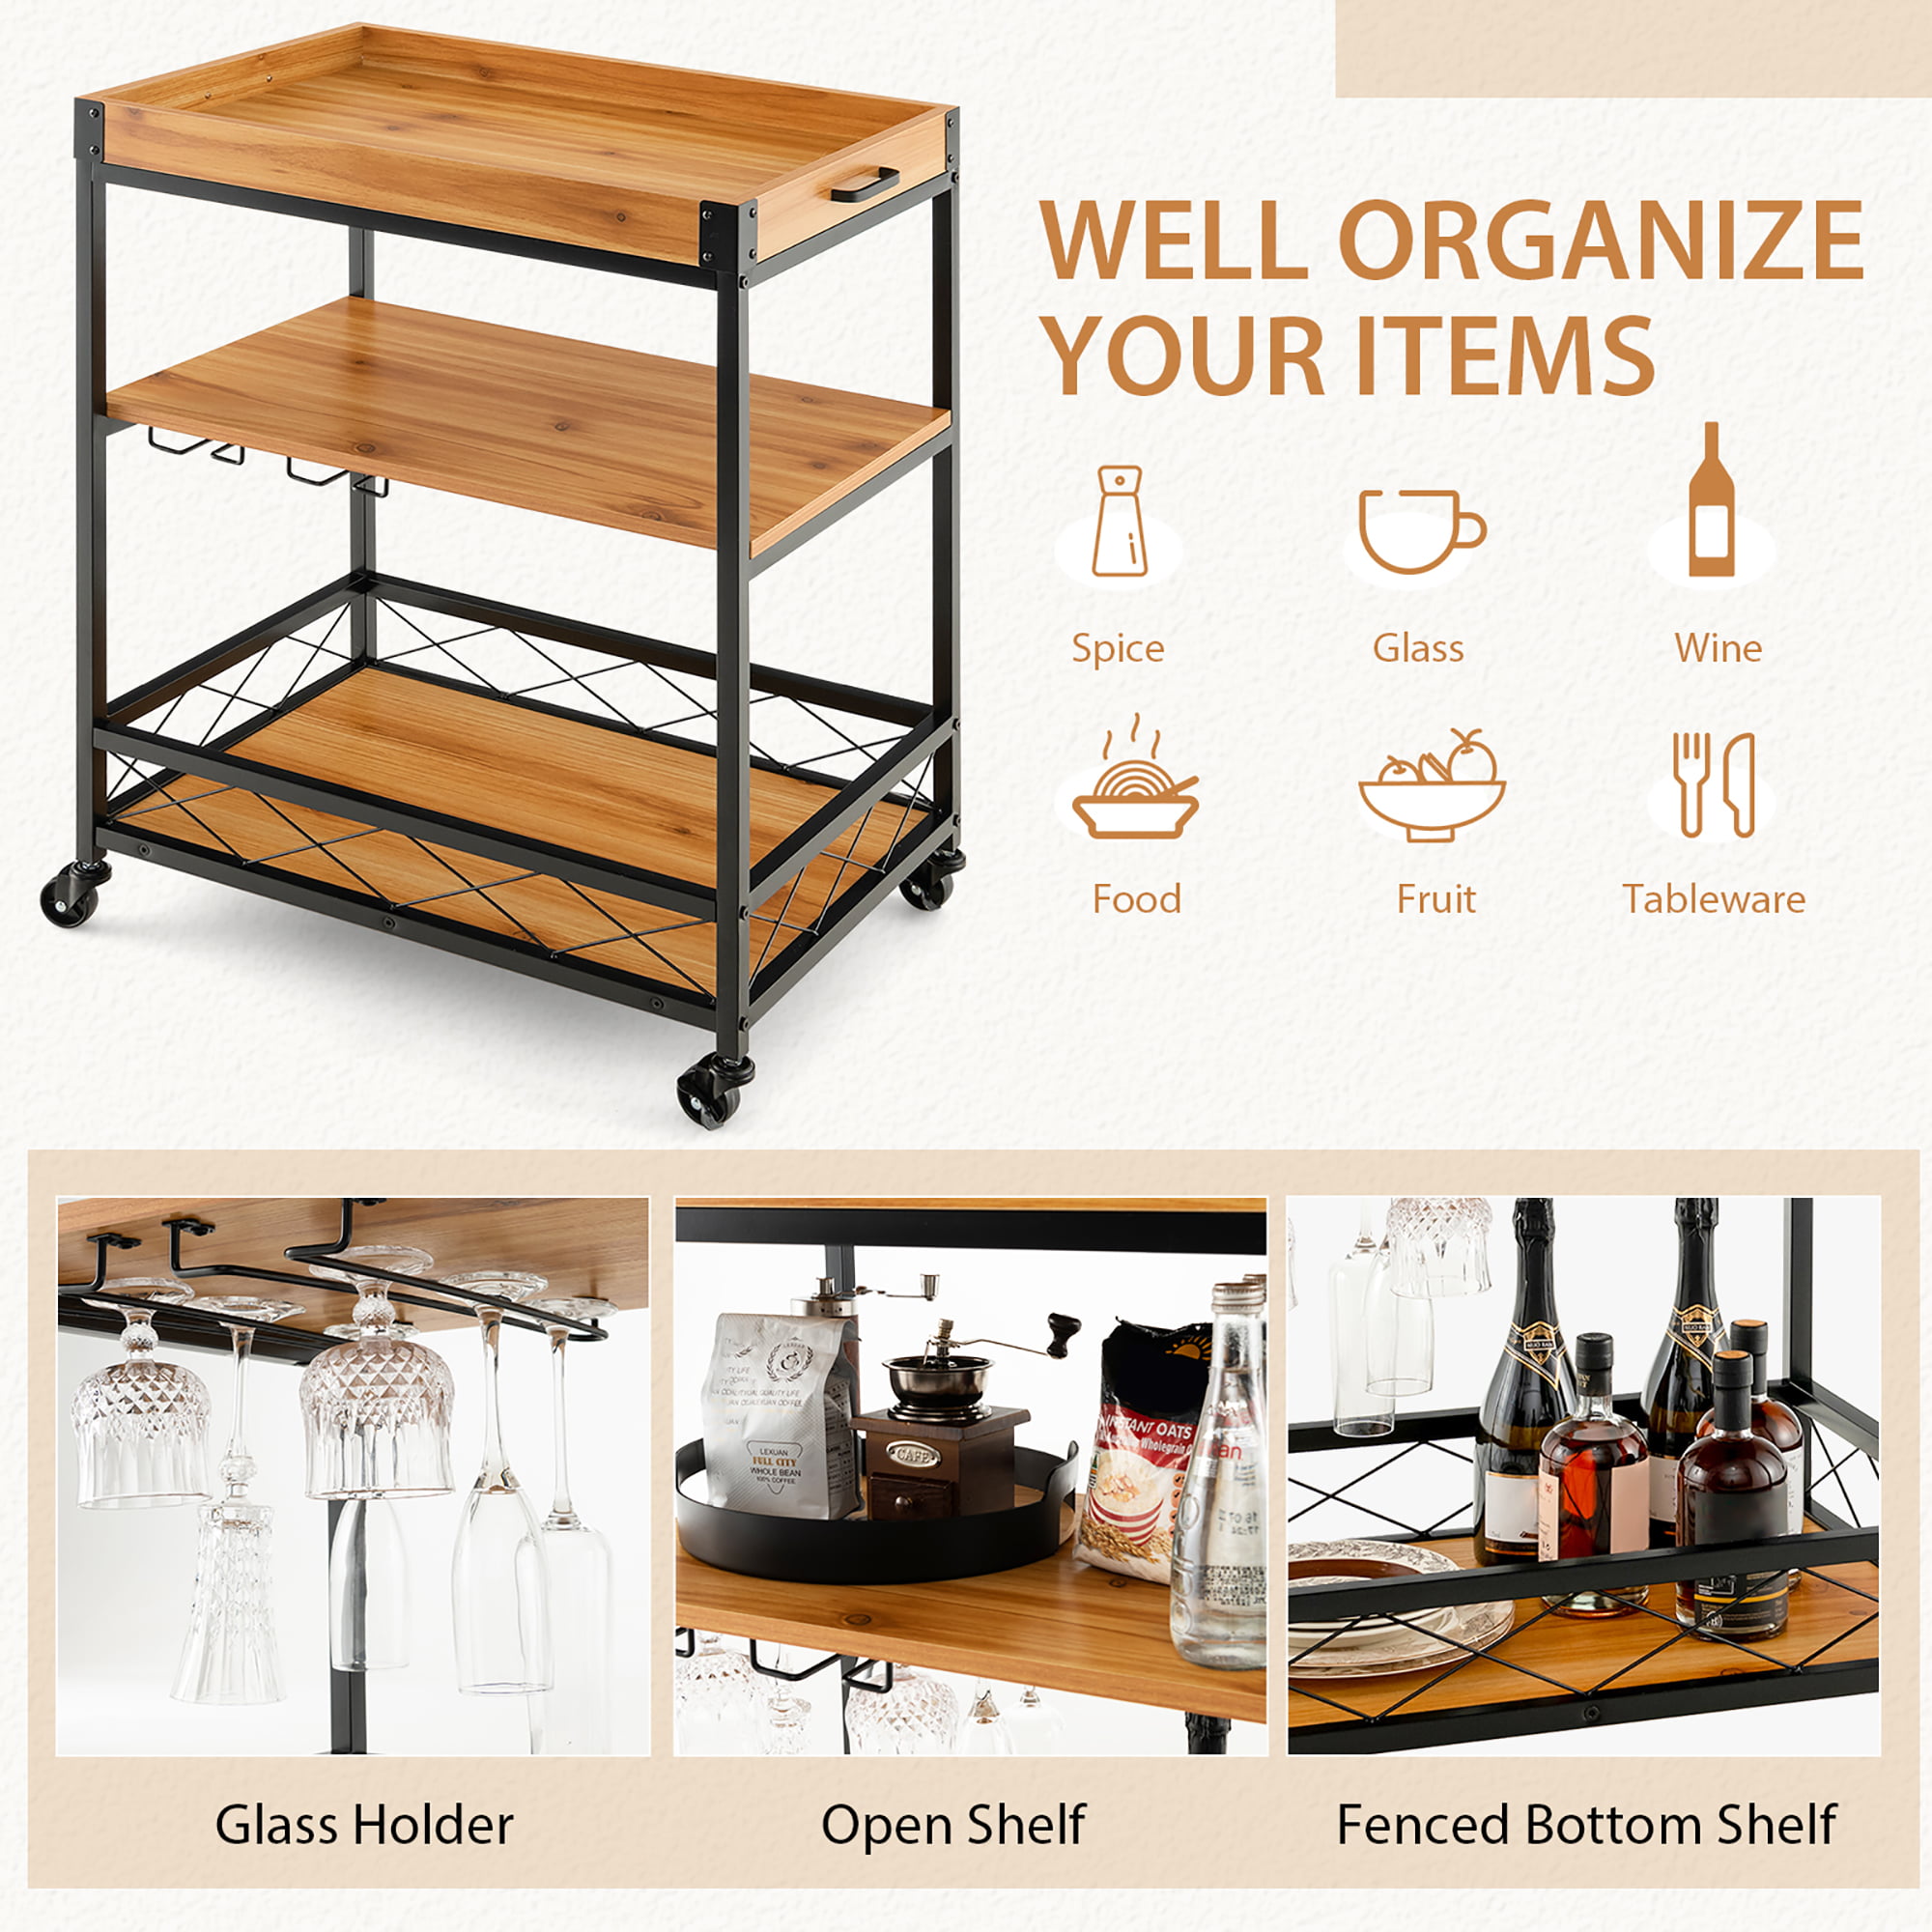 3 Tiers Kitchen Island Serving Bar Cart with Glasses Holder and Wine Bottle  Rack - Costway